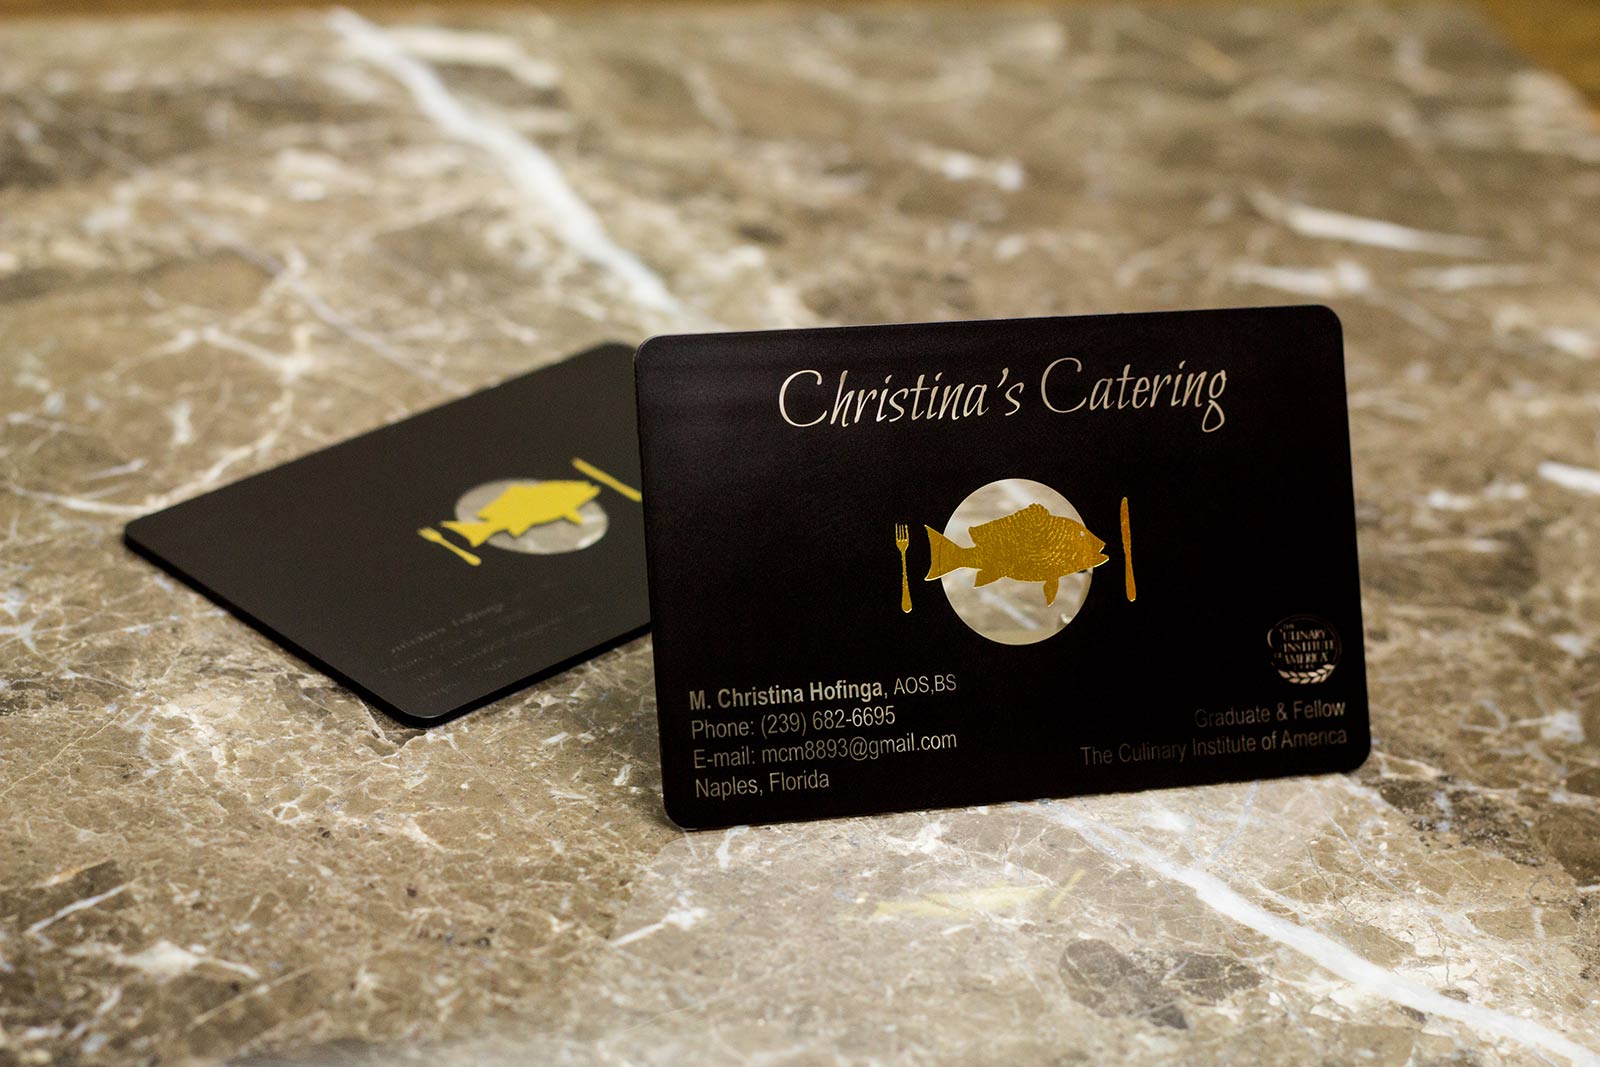 Christina's Catering Business Card